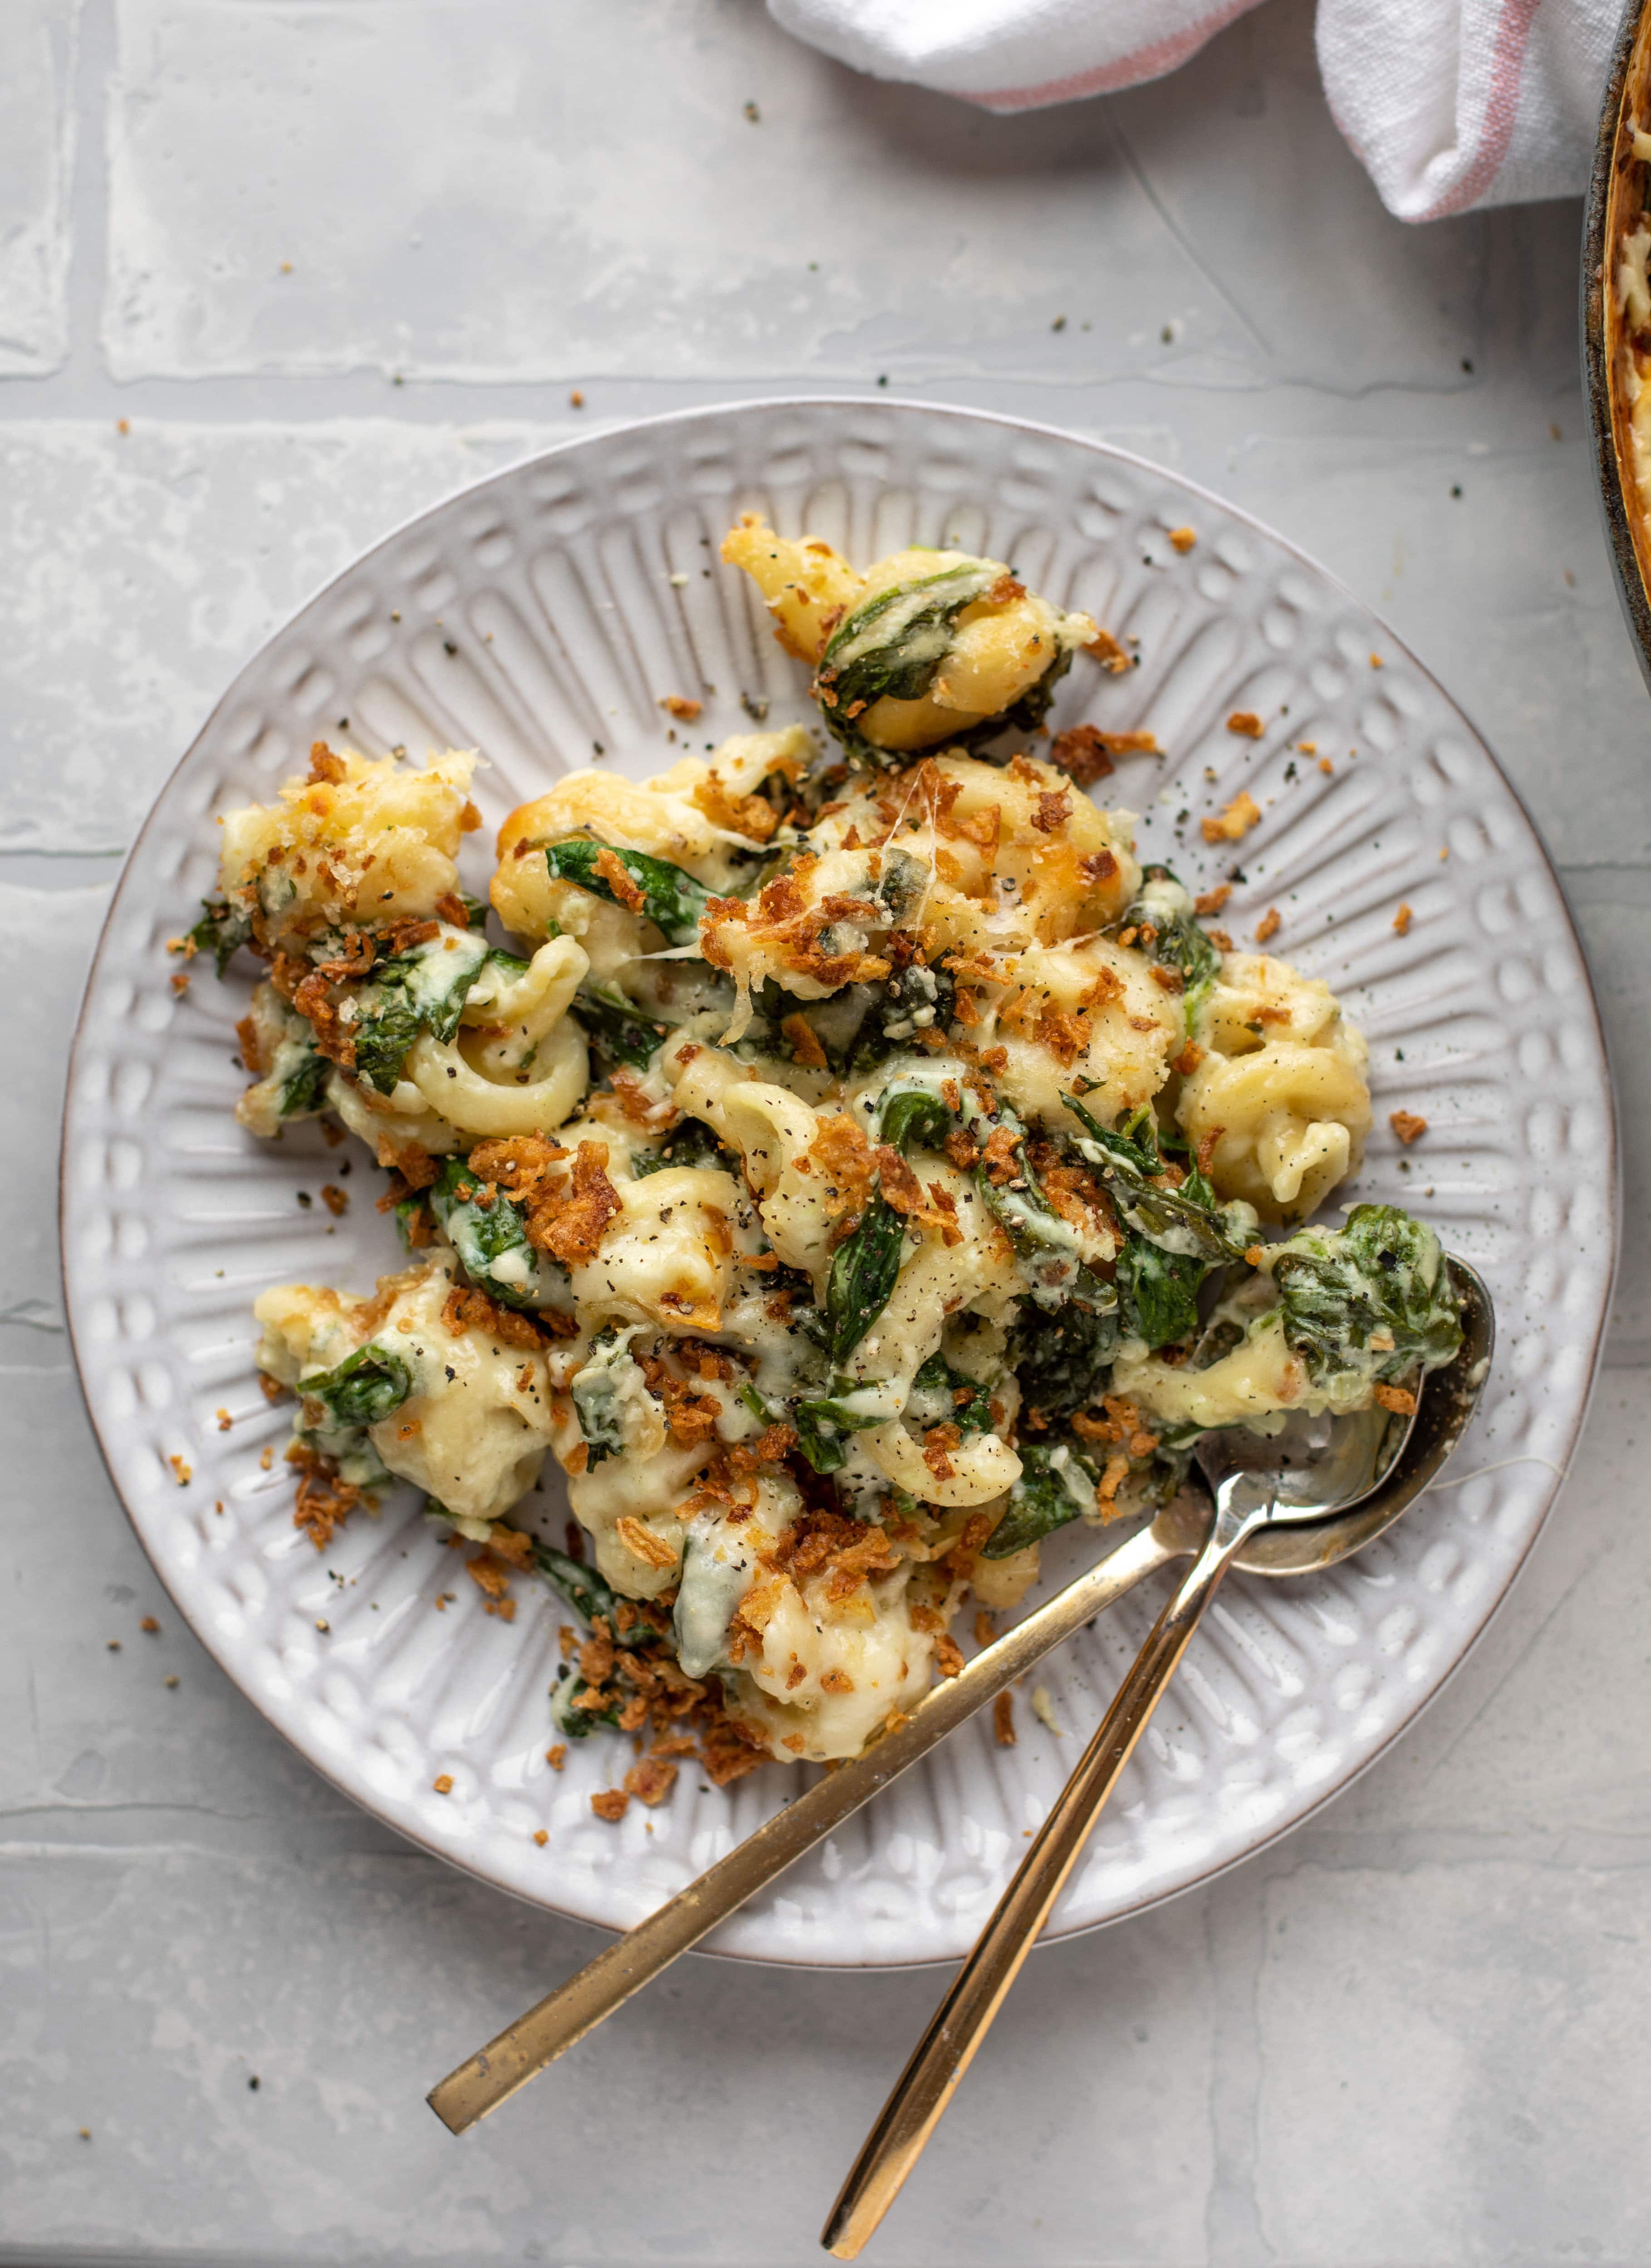 This creamed spinach mac and cheese is a dreamy, cheesy mac and cheese dish with tons of fresh baby spinach! Super comforting and flavorful. 